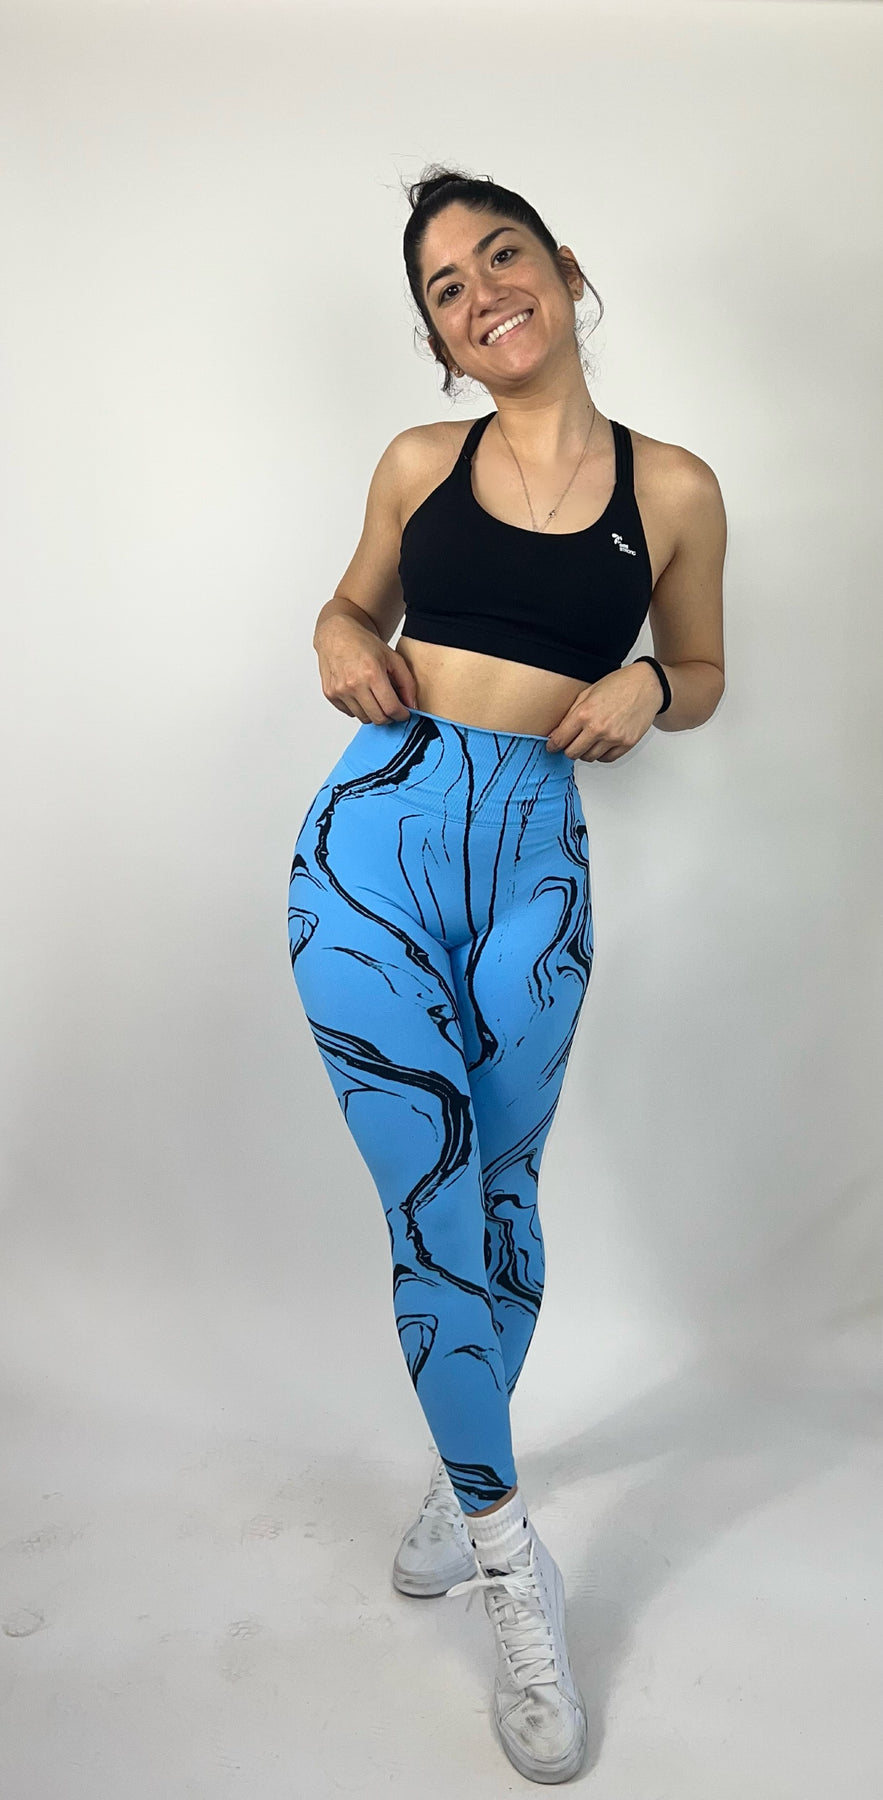 Last picture is the best 👉🏻🫶🏻💜 this leggings are so cute  @beestrong_activewear